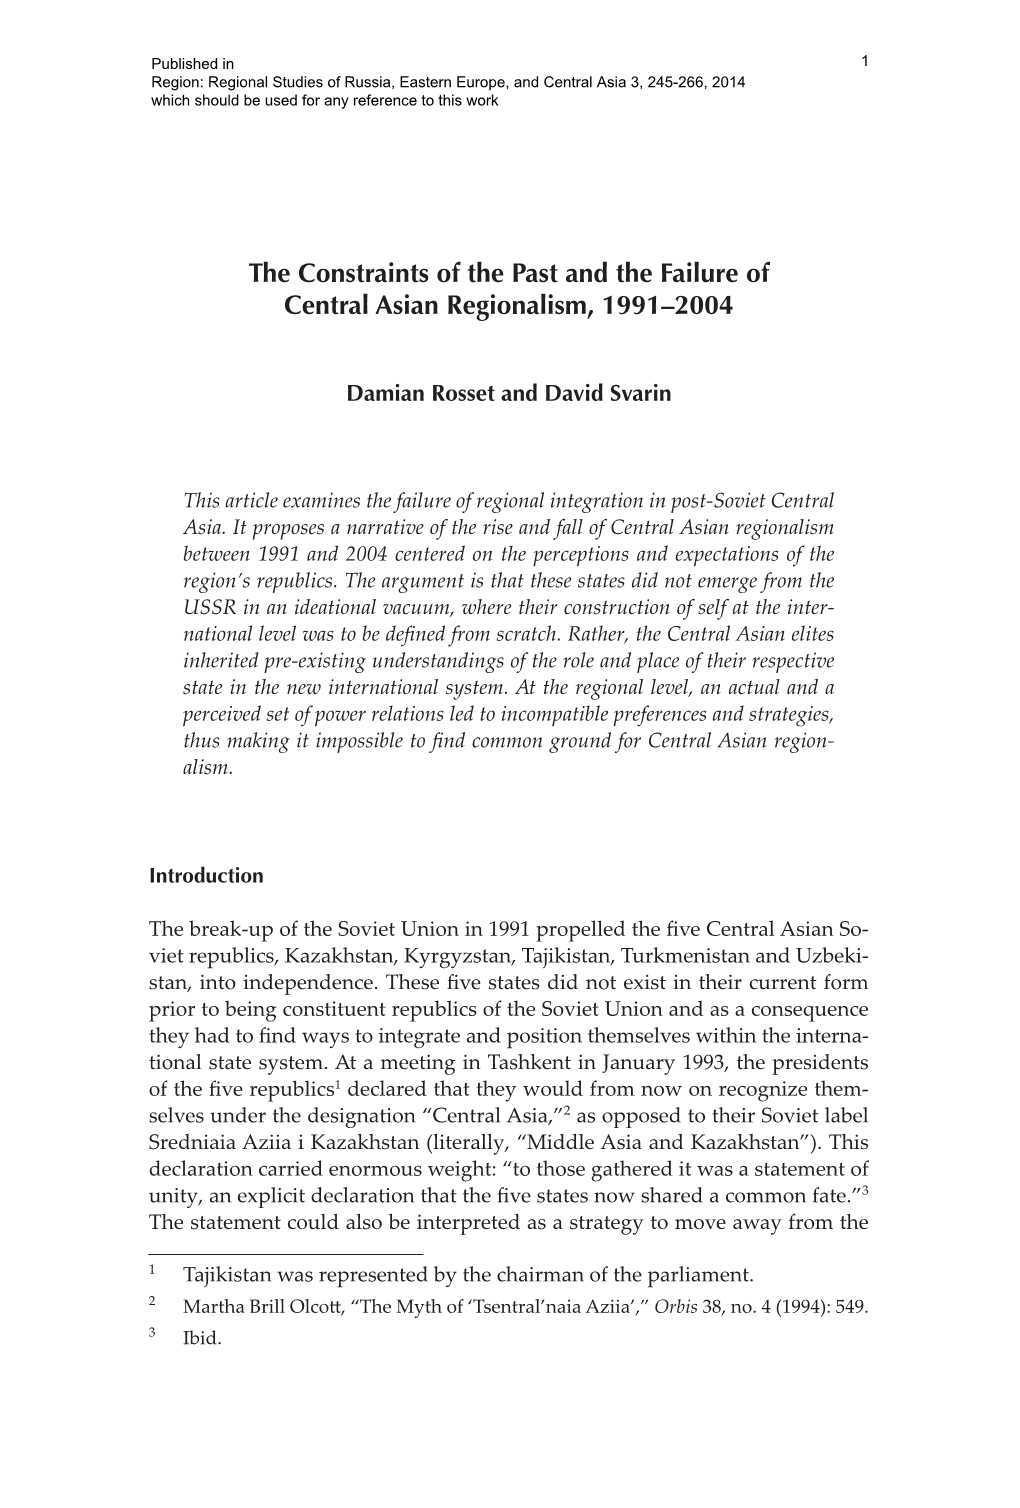 The Constraints of the Past and the Failure of Central Asian Regionalism, 1991–2004